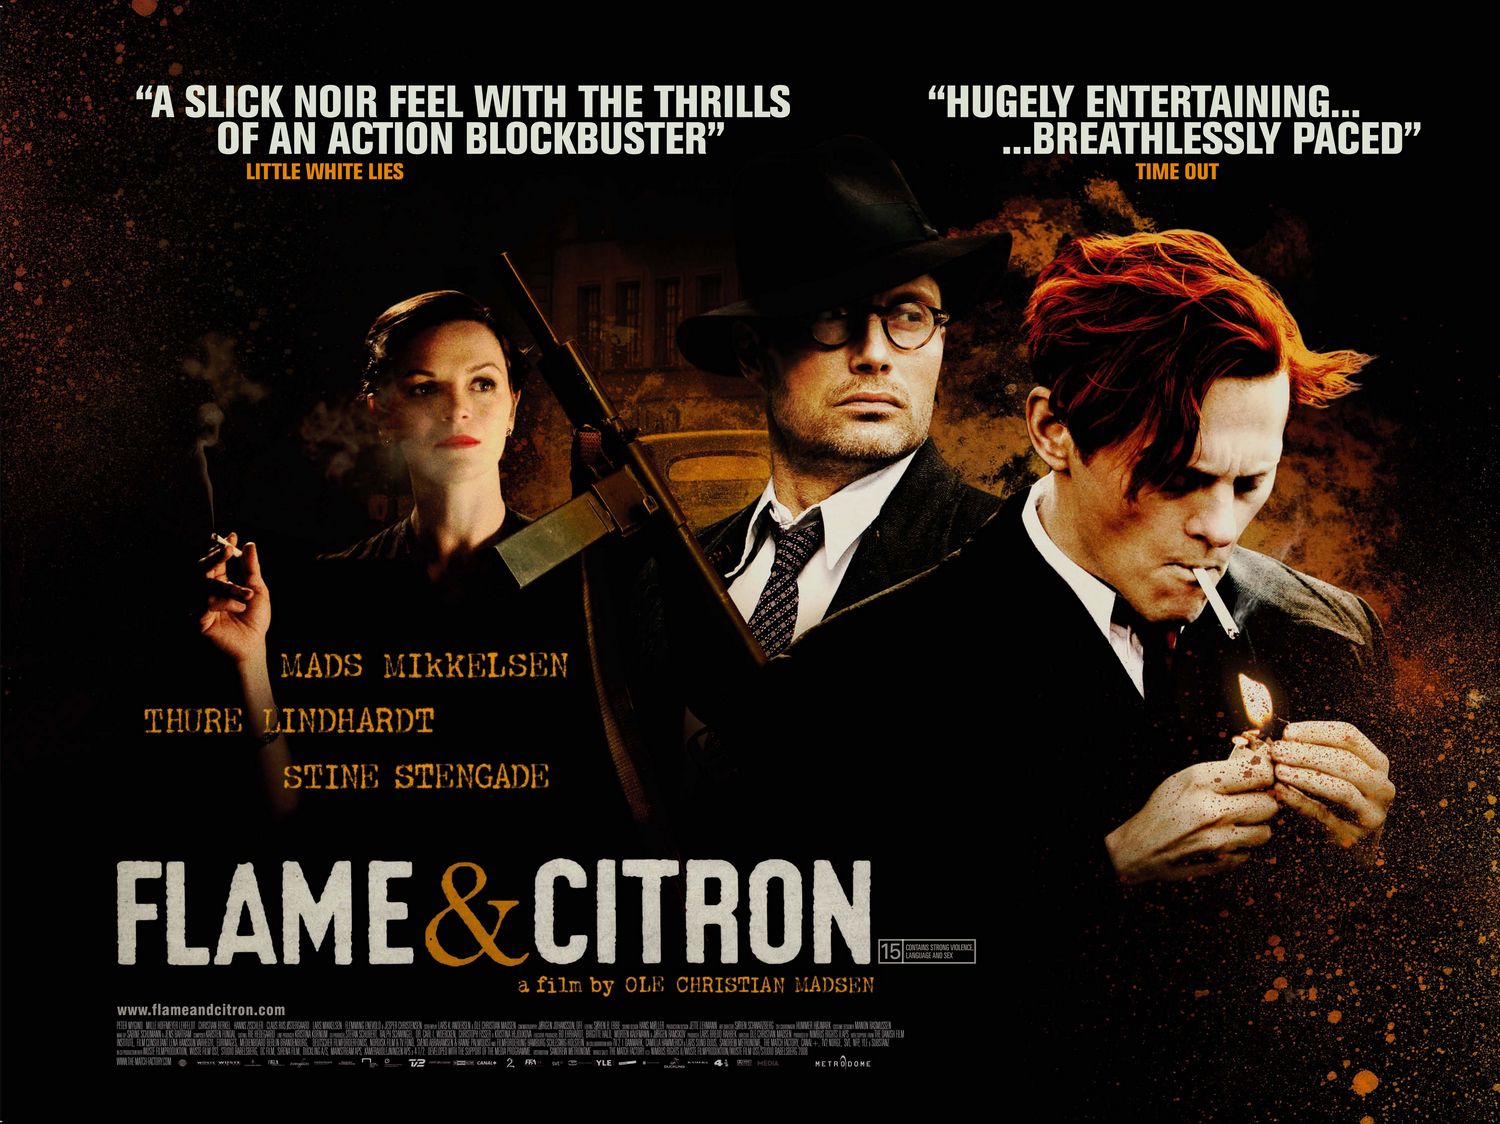 Flame and Citron movies in USA